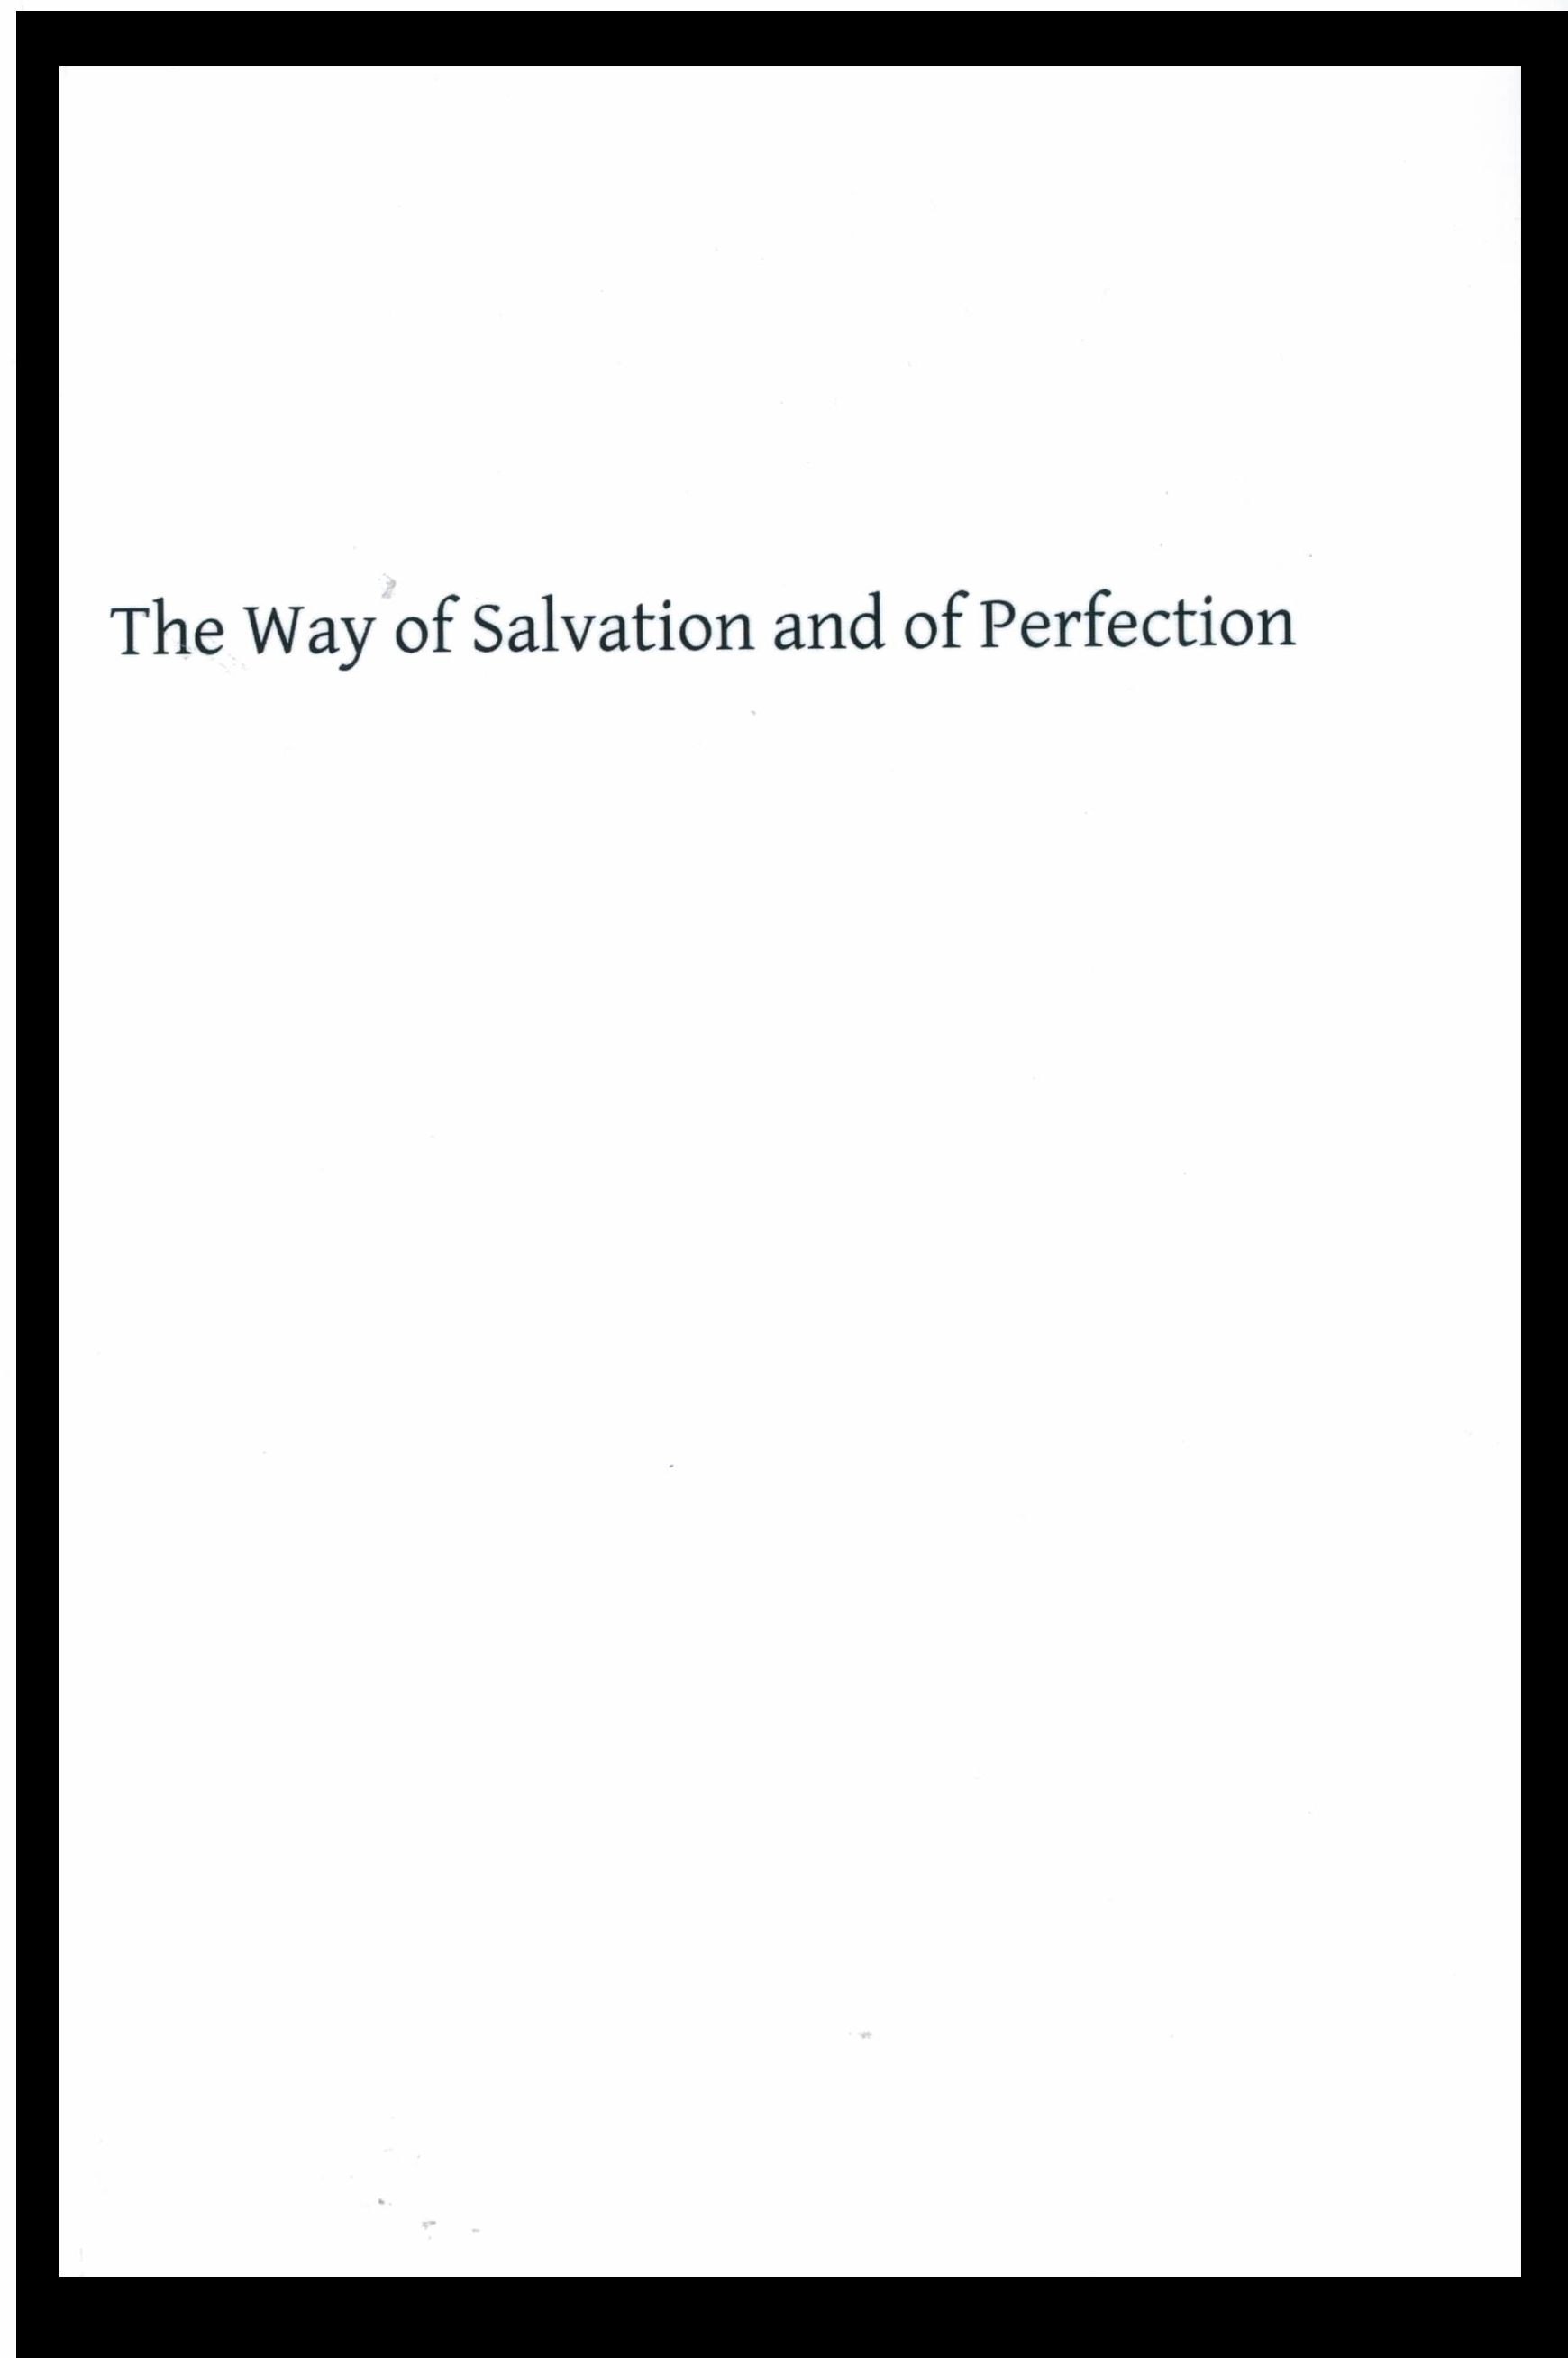 The Way of Salvation and of Perfection by St. Alphonsus De Liguori 108-9781482650594